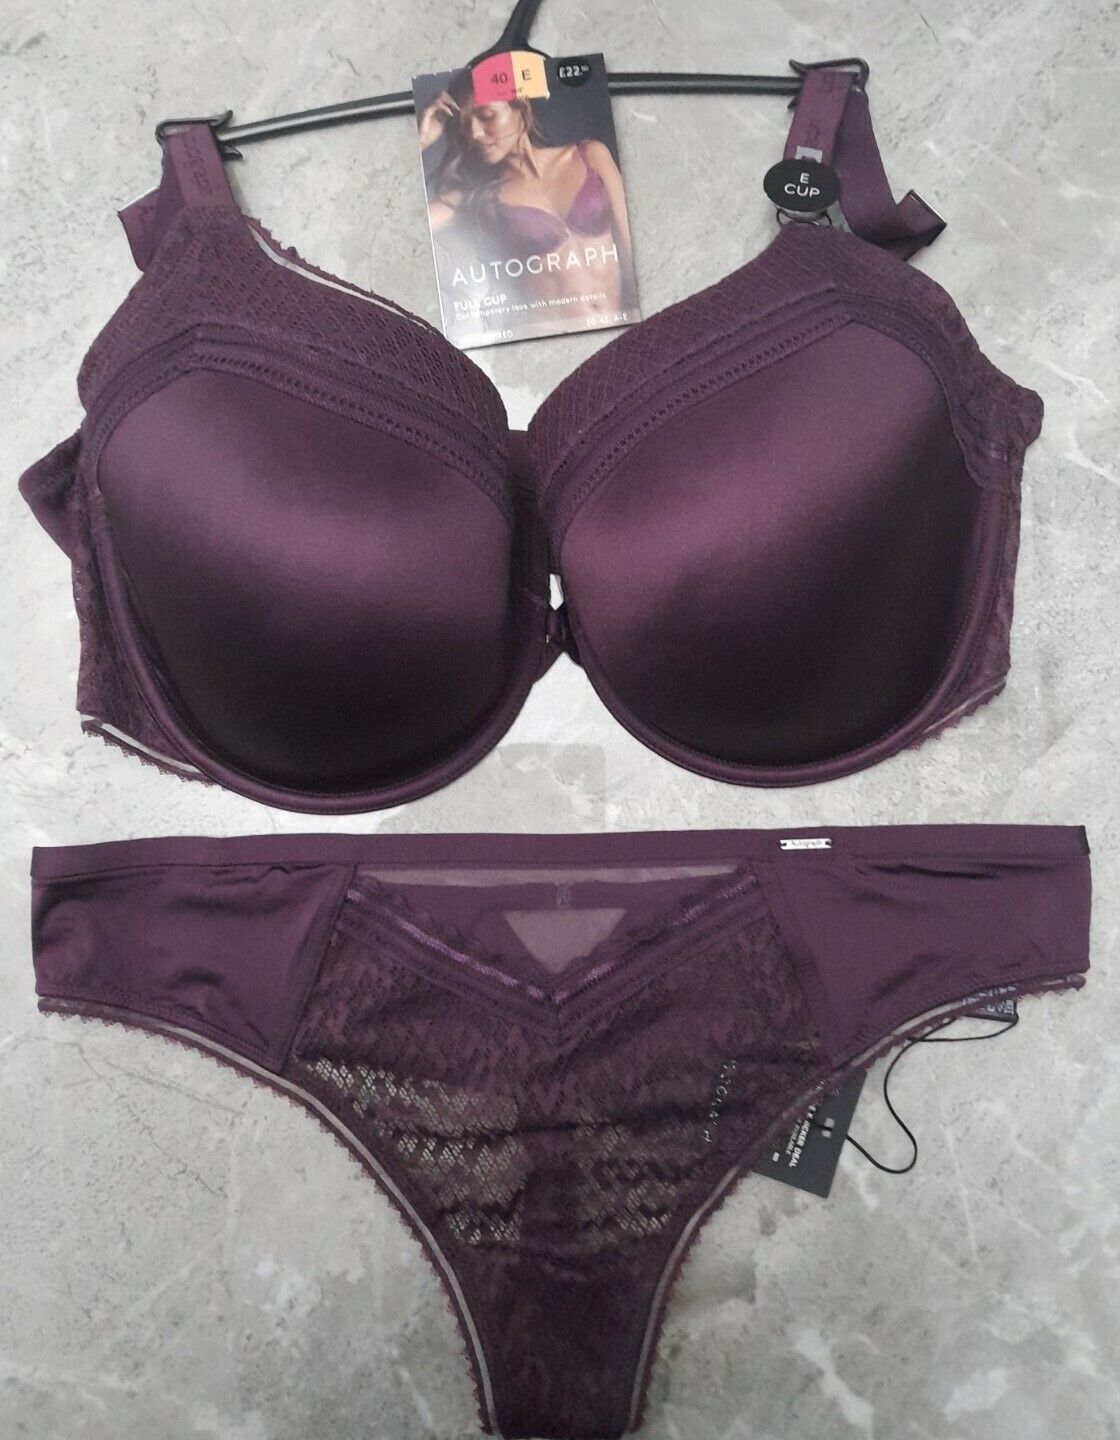 40E Bra Manufacturer regenerated product Mamp;S AUTOGRAPH Snake Max 73% OFF Lace T Cup Padded bra Full amp;